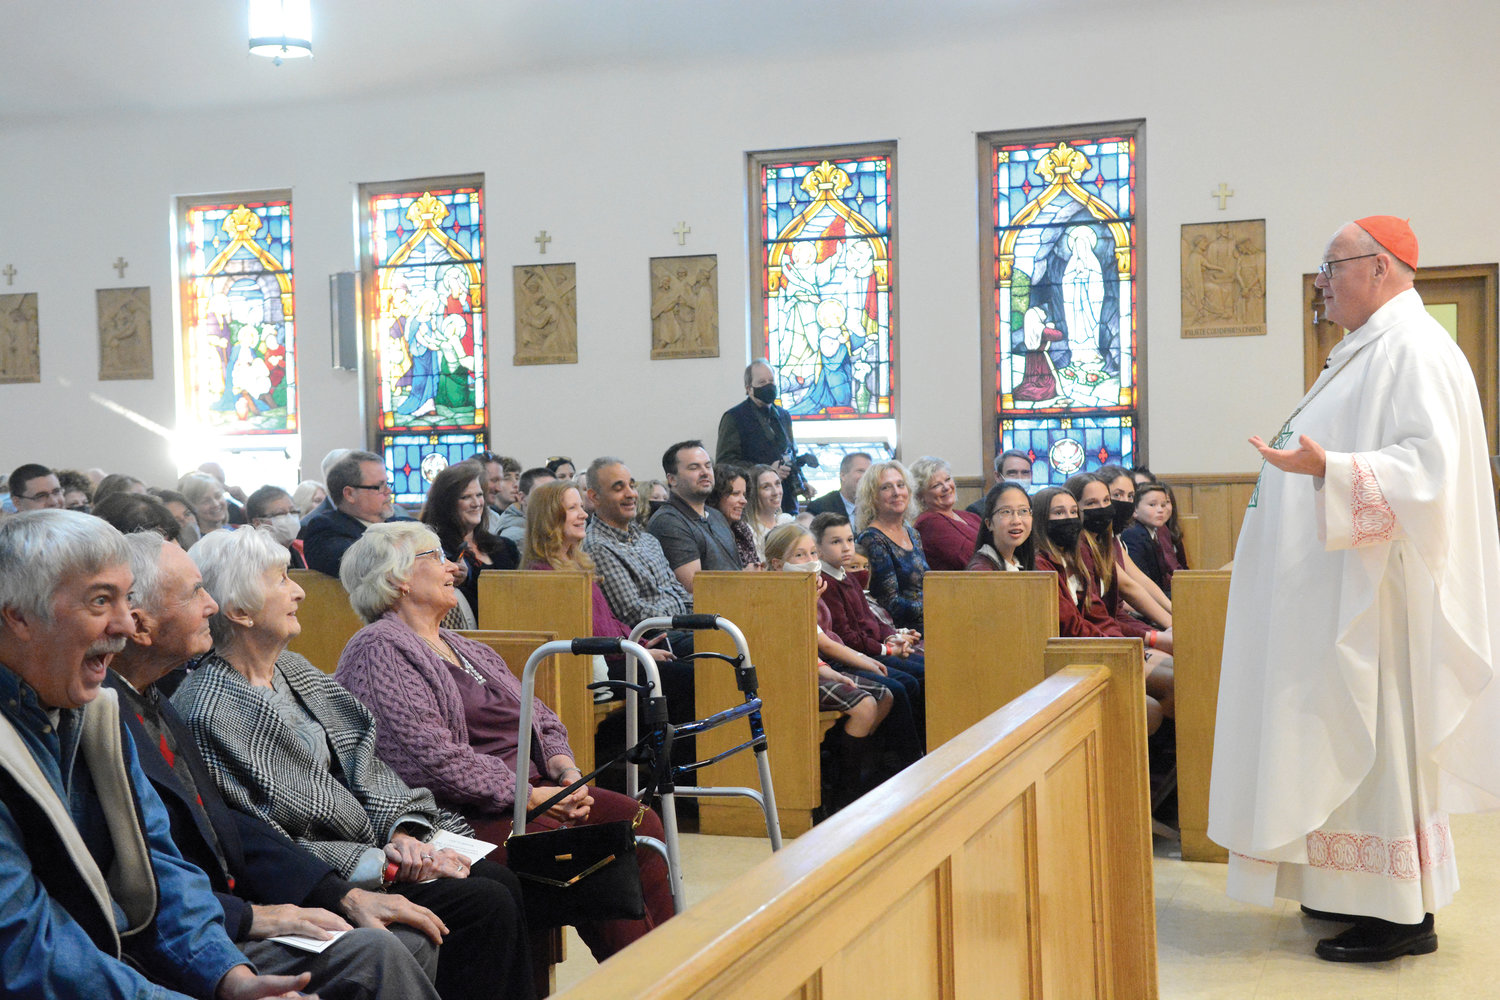 Cardinal Dolan celebrated Mass for the 125th anniversary of Most Precious Blood Church in Walden Nov. 6.